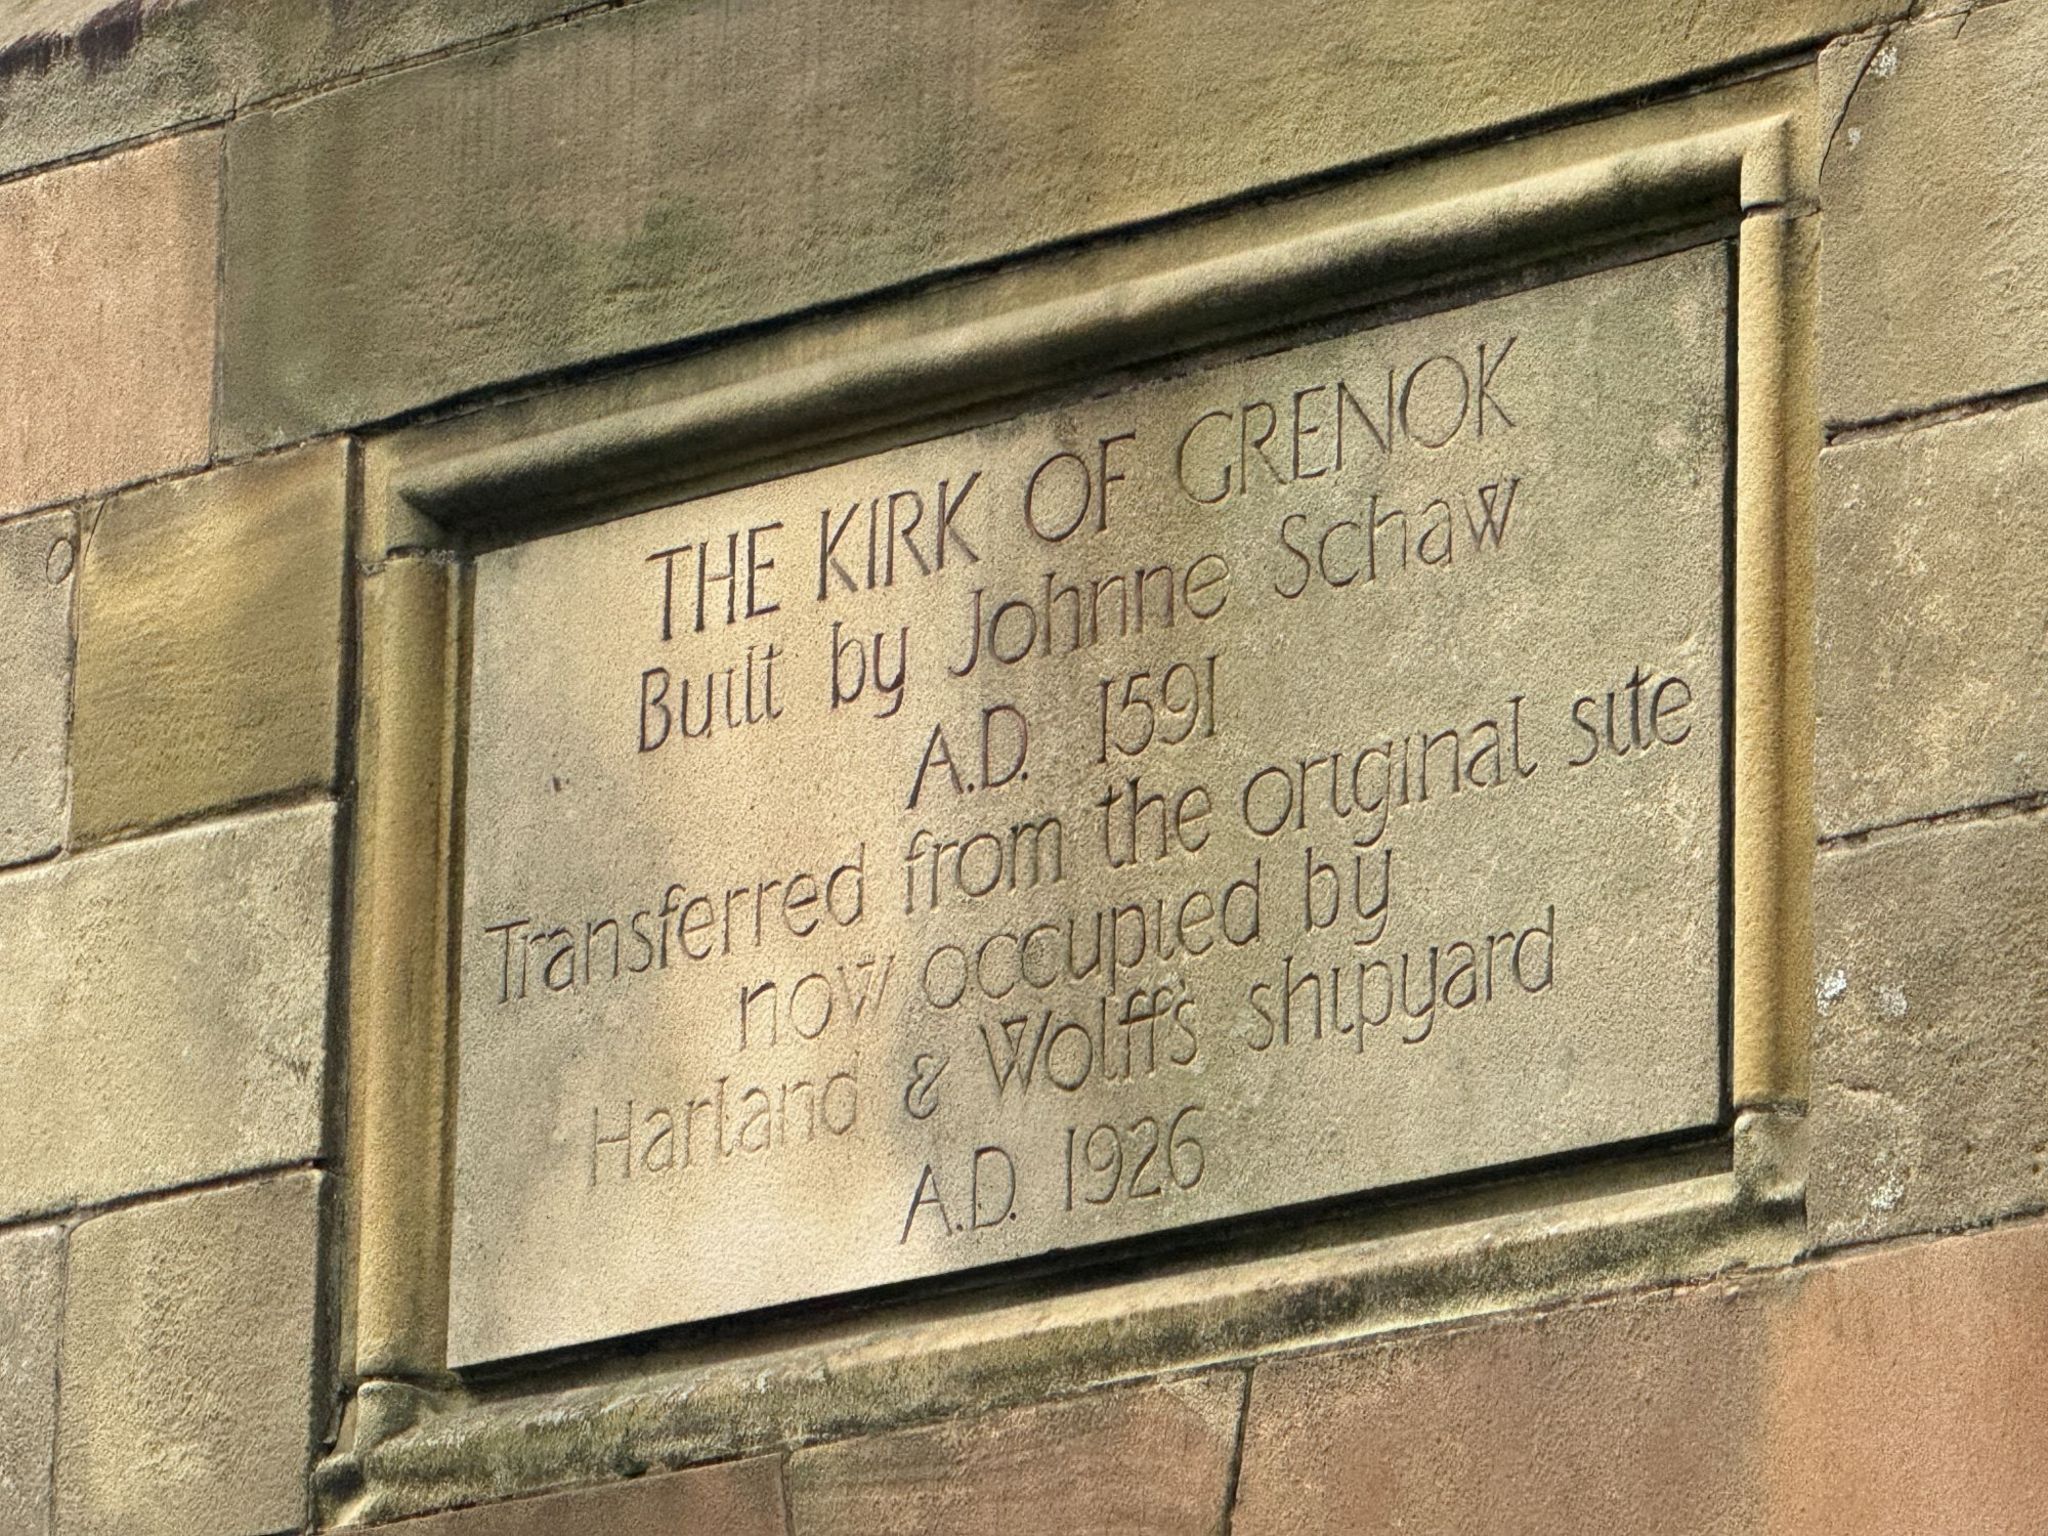 Plaque detailing the move to Greenock's Esplanade that reads: 'The Kirk of Grenok Built by Johnne Schaw A.D. 1591. Transferred from the original site now occupied by Harland & Wolffs shipyard A.D. 1926"